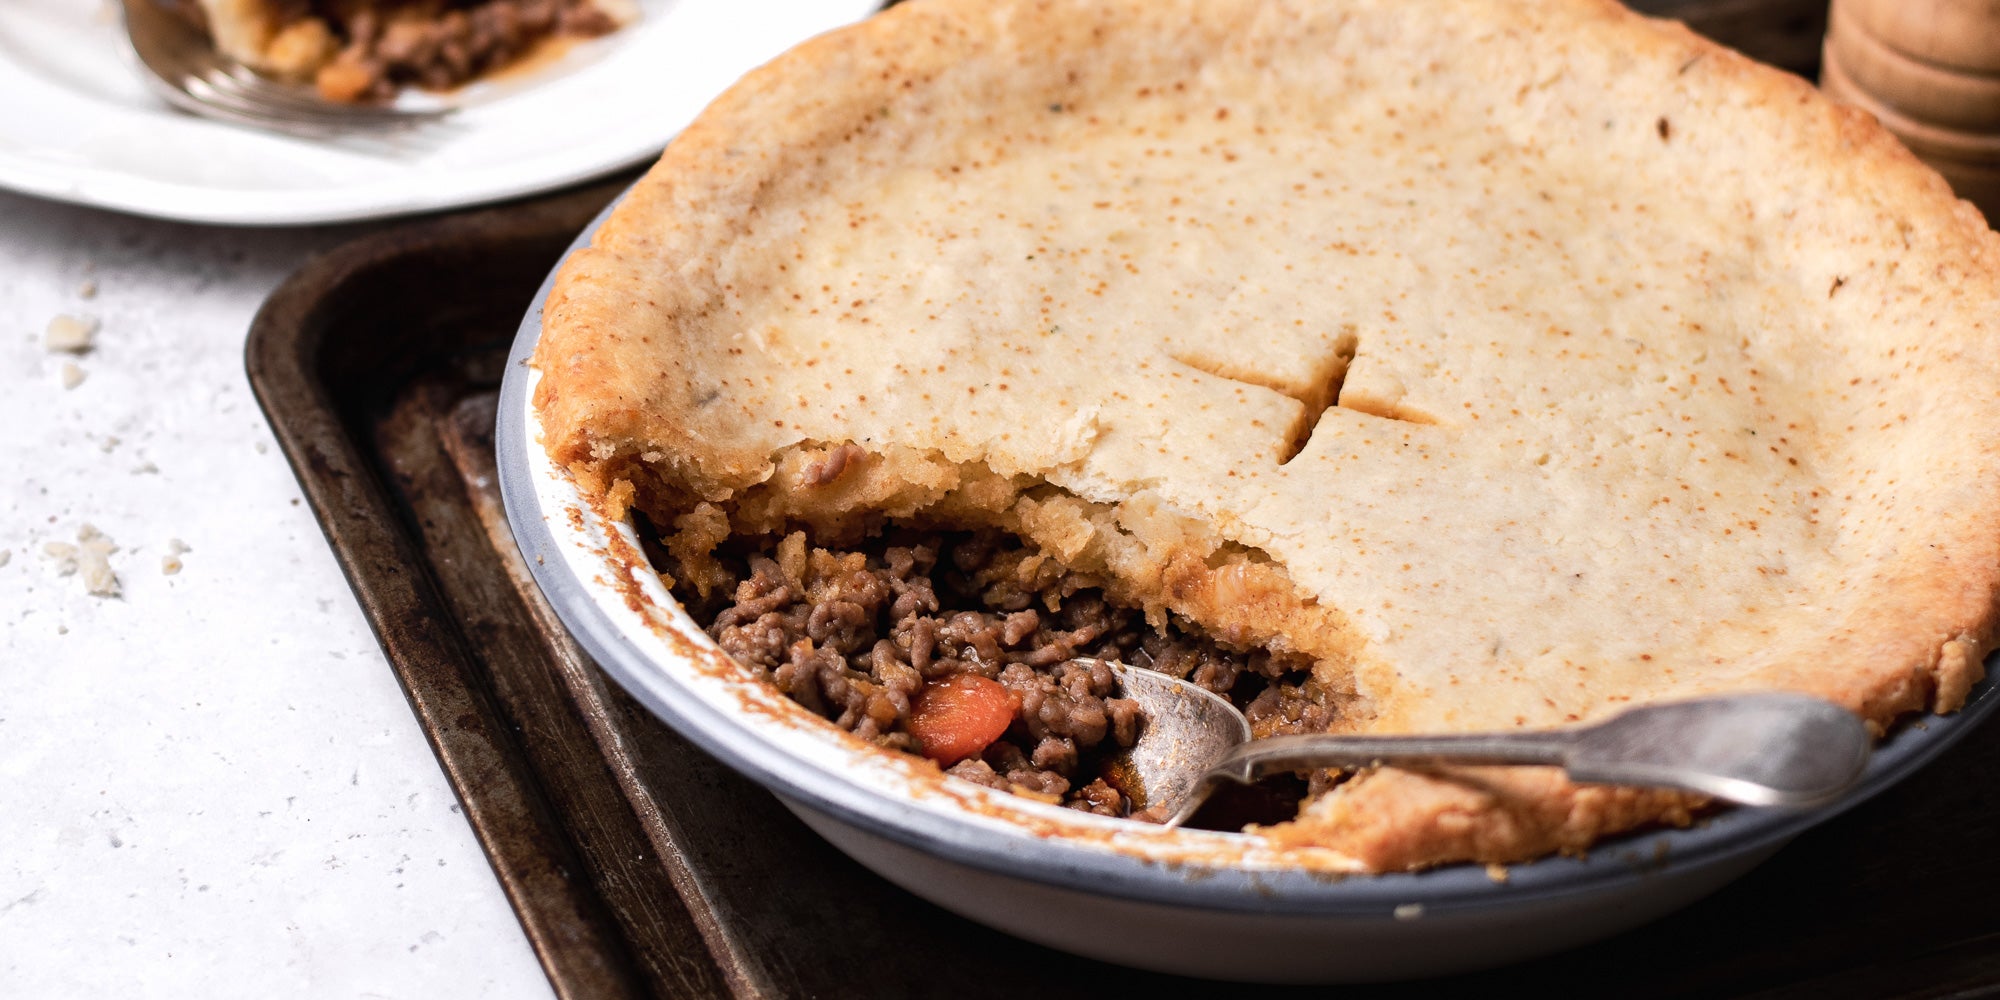 Close up of Suet Crusted Beef & Onion Pie, with the crust open and the filling being scooped out by a serving spoon. Pie is served on a baking tray